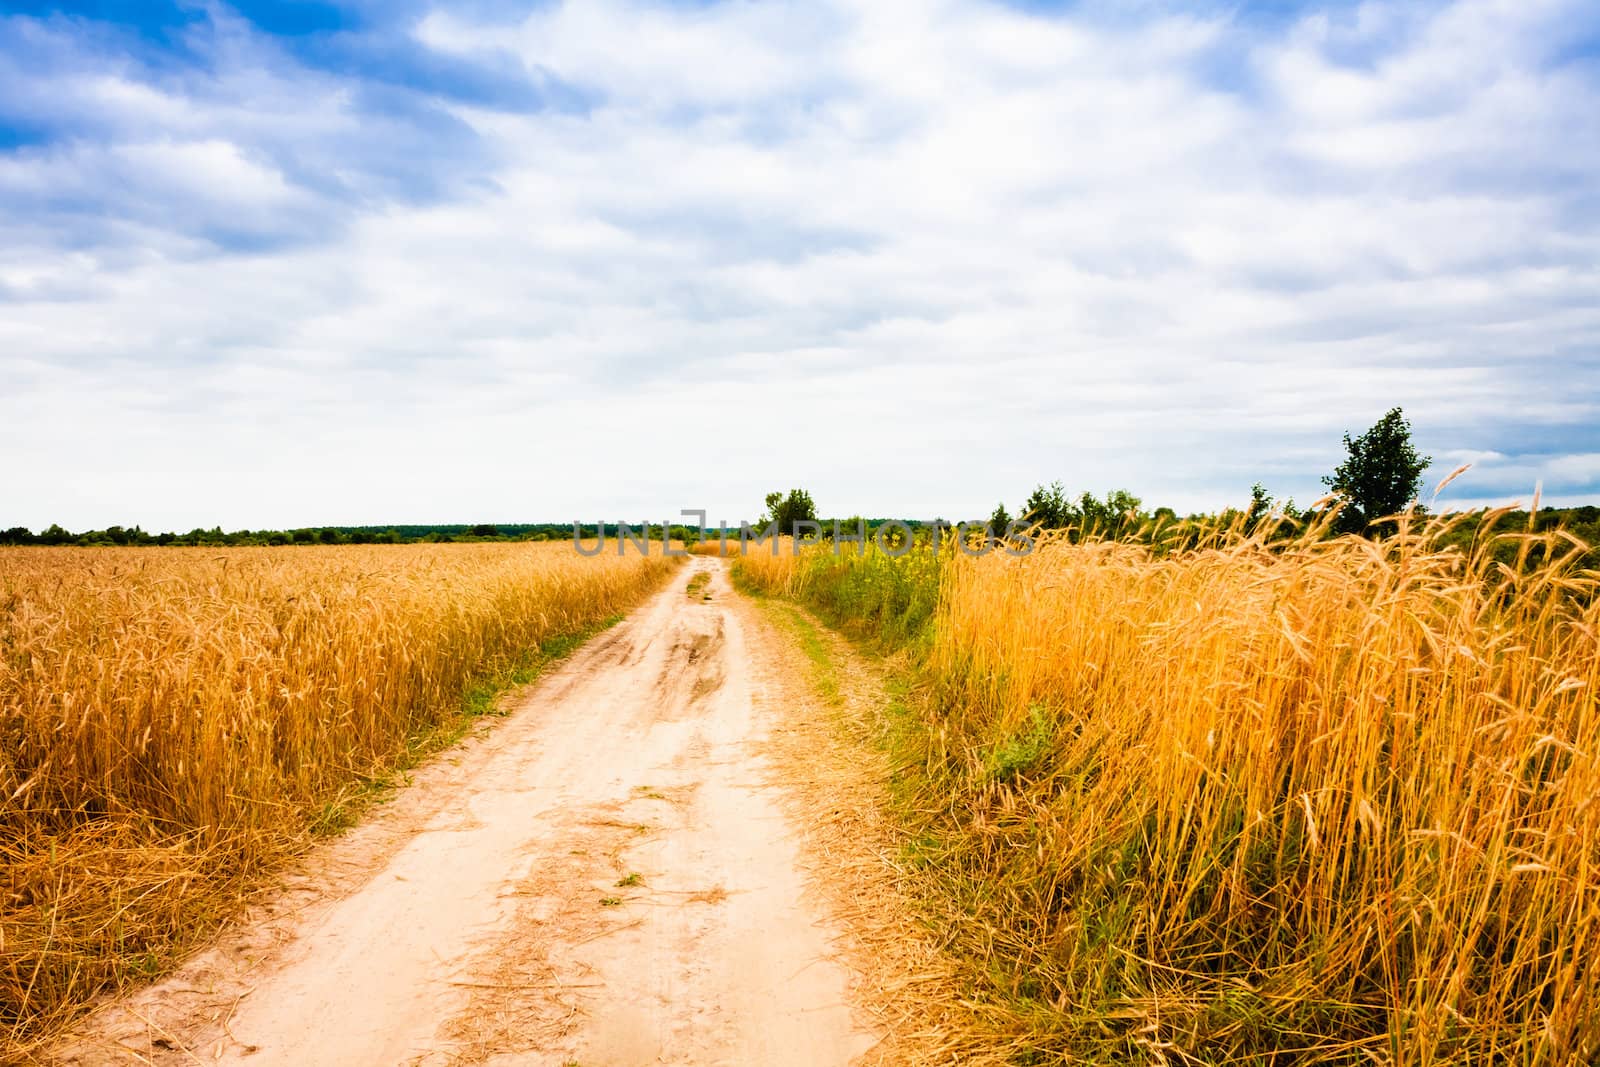 Rural Countryside Road Through Fields With Wheat by ryhor